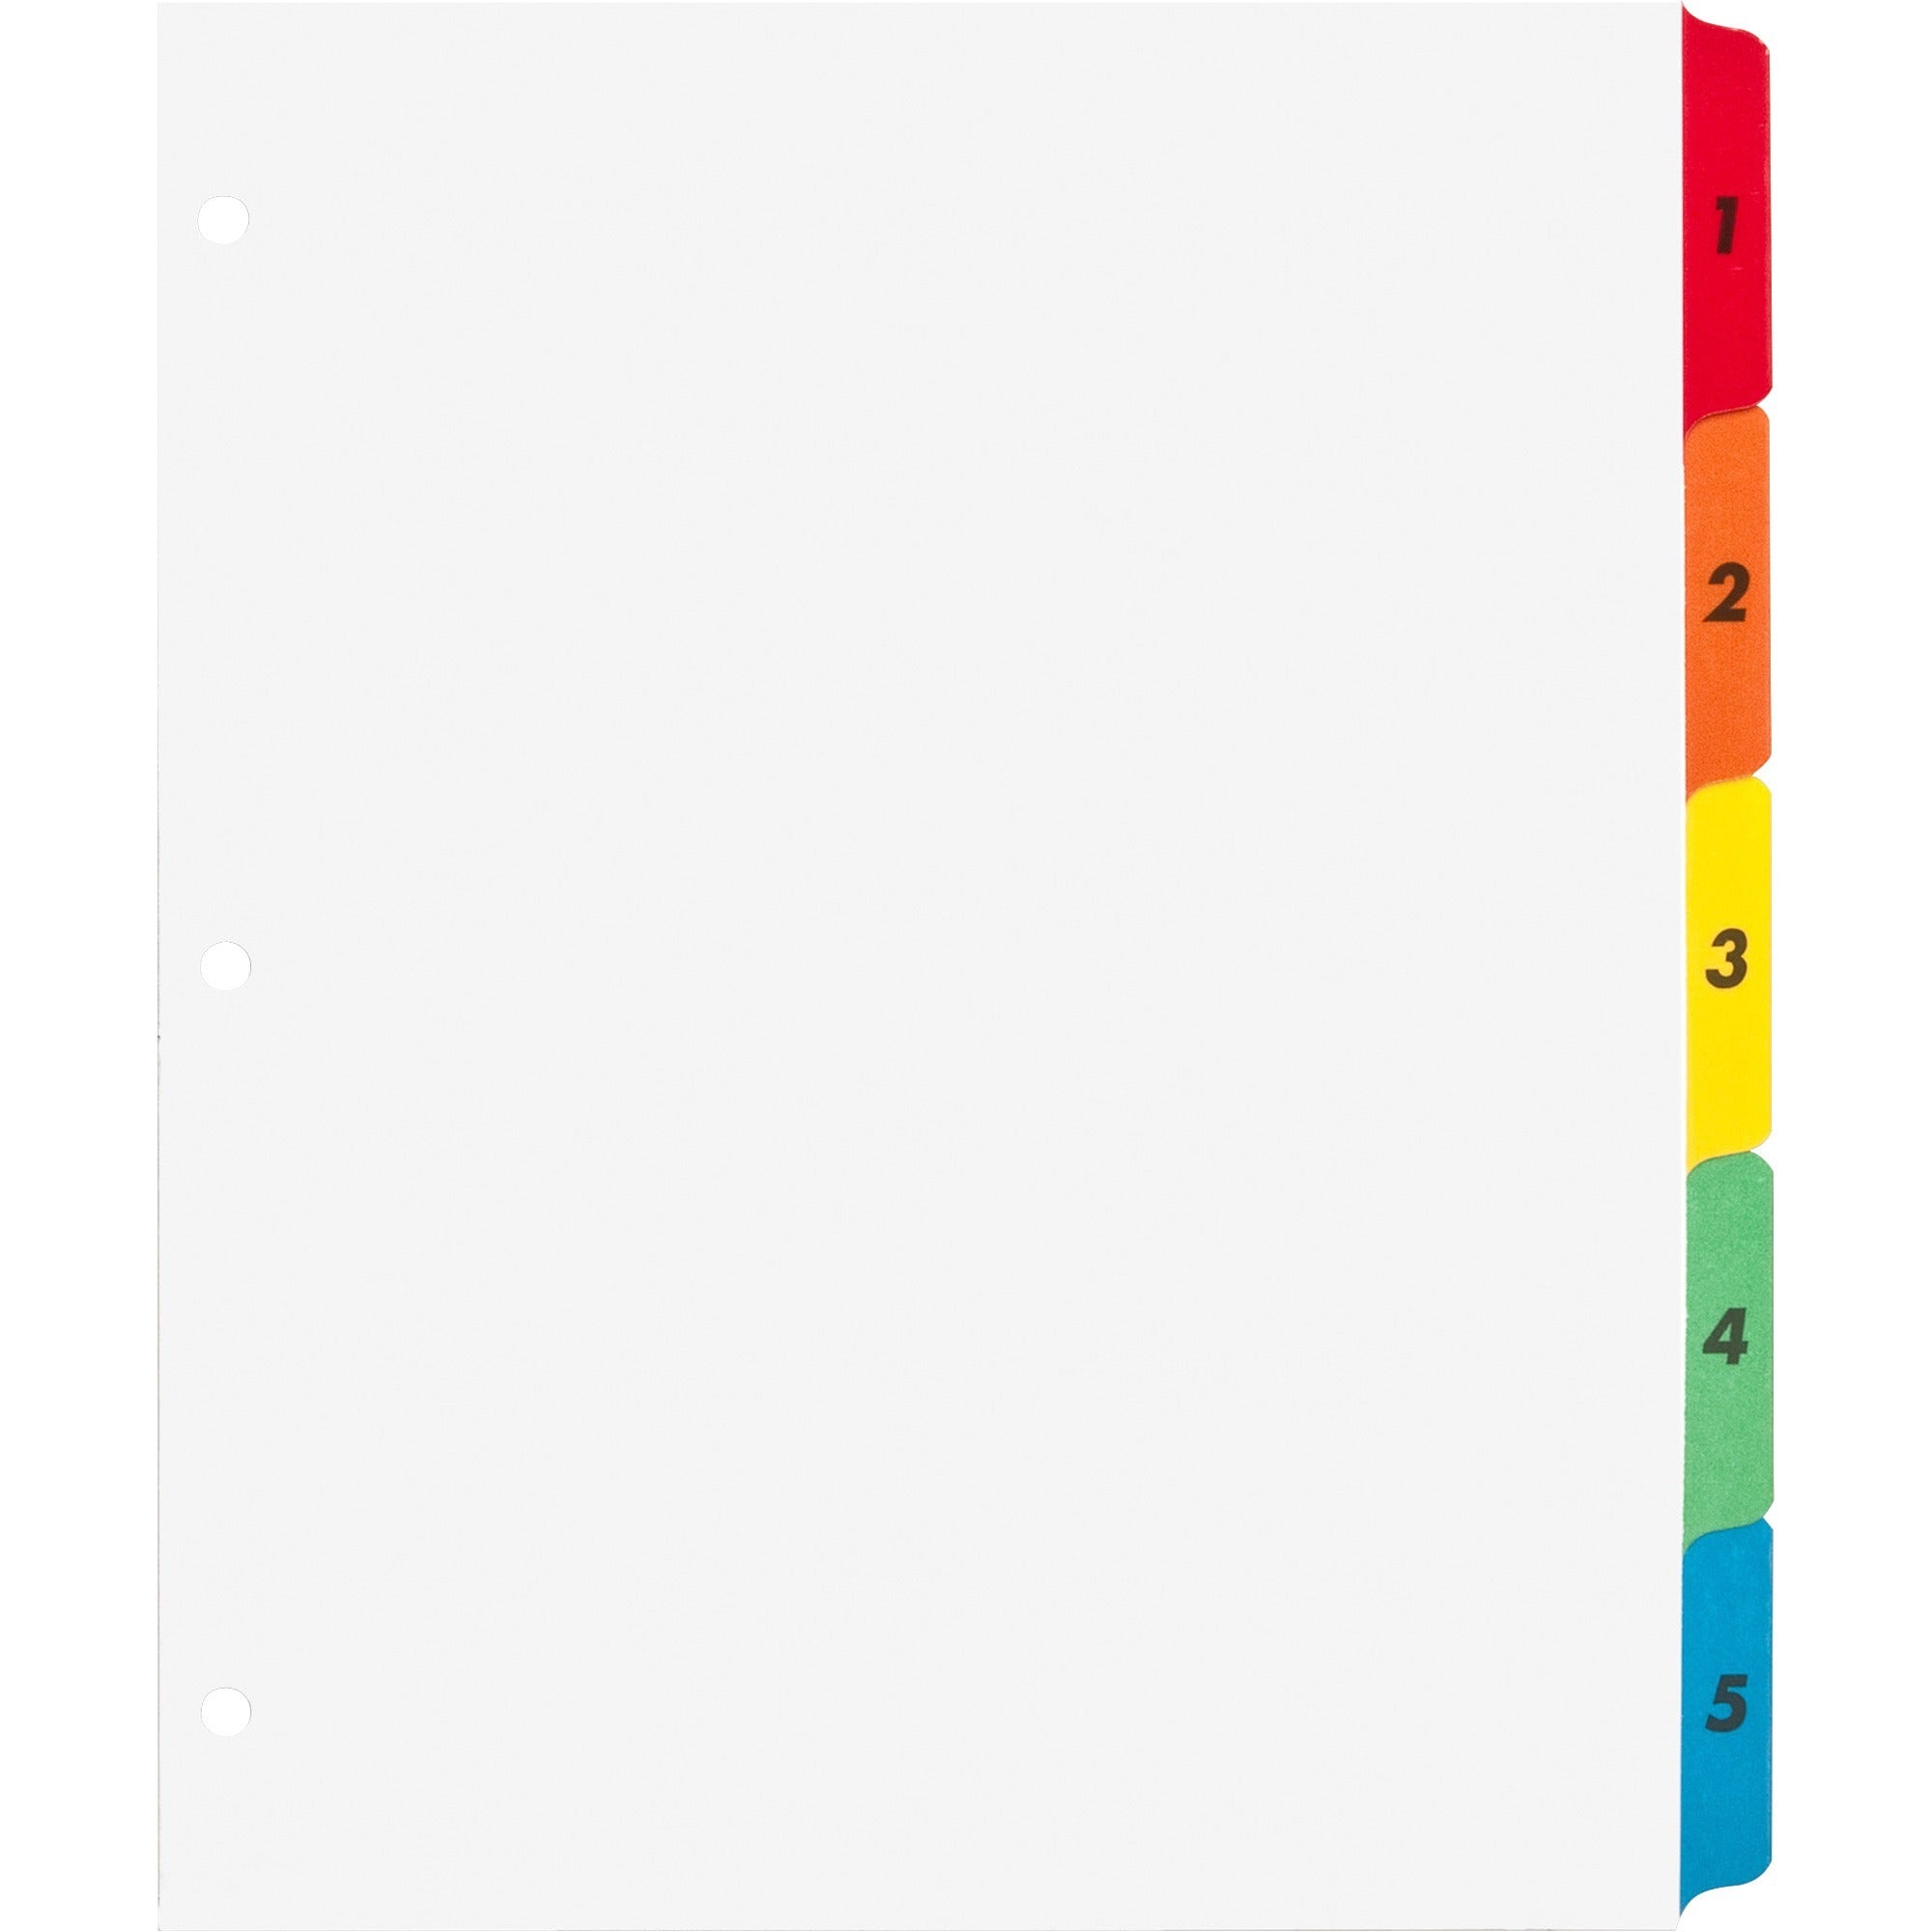 Business Source Table of Content Quick Index Dividers - Printed Tab(s) - Digit - 1-5 - 5 Tab(s)/Set - 8.5" Divider Width x 11" Divider Length - 3 Hole Punched - Multicolor Mylar Divider - Multicolor Mylar Tab(s) - 5 / Set